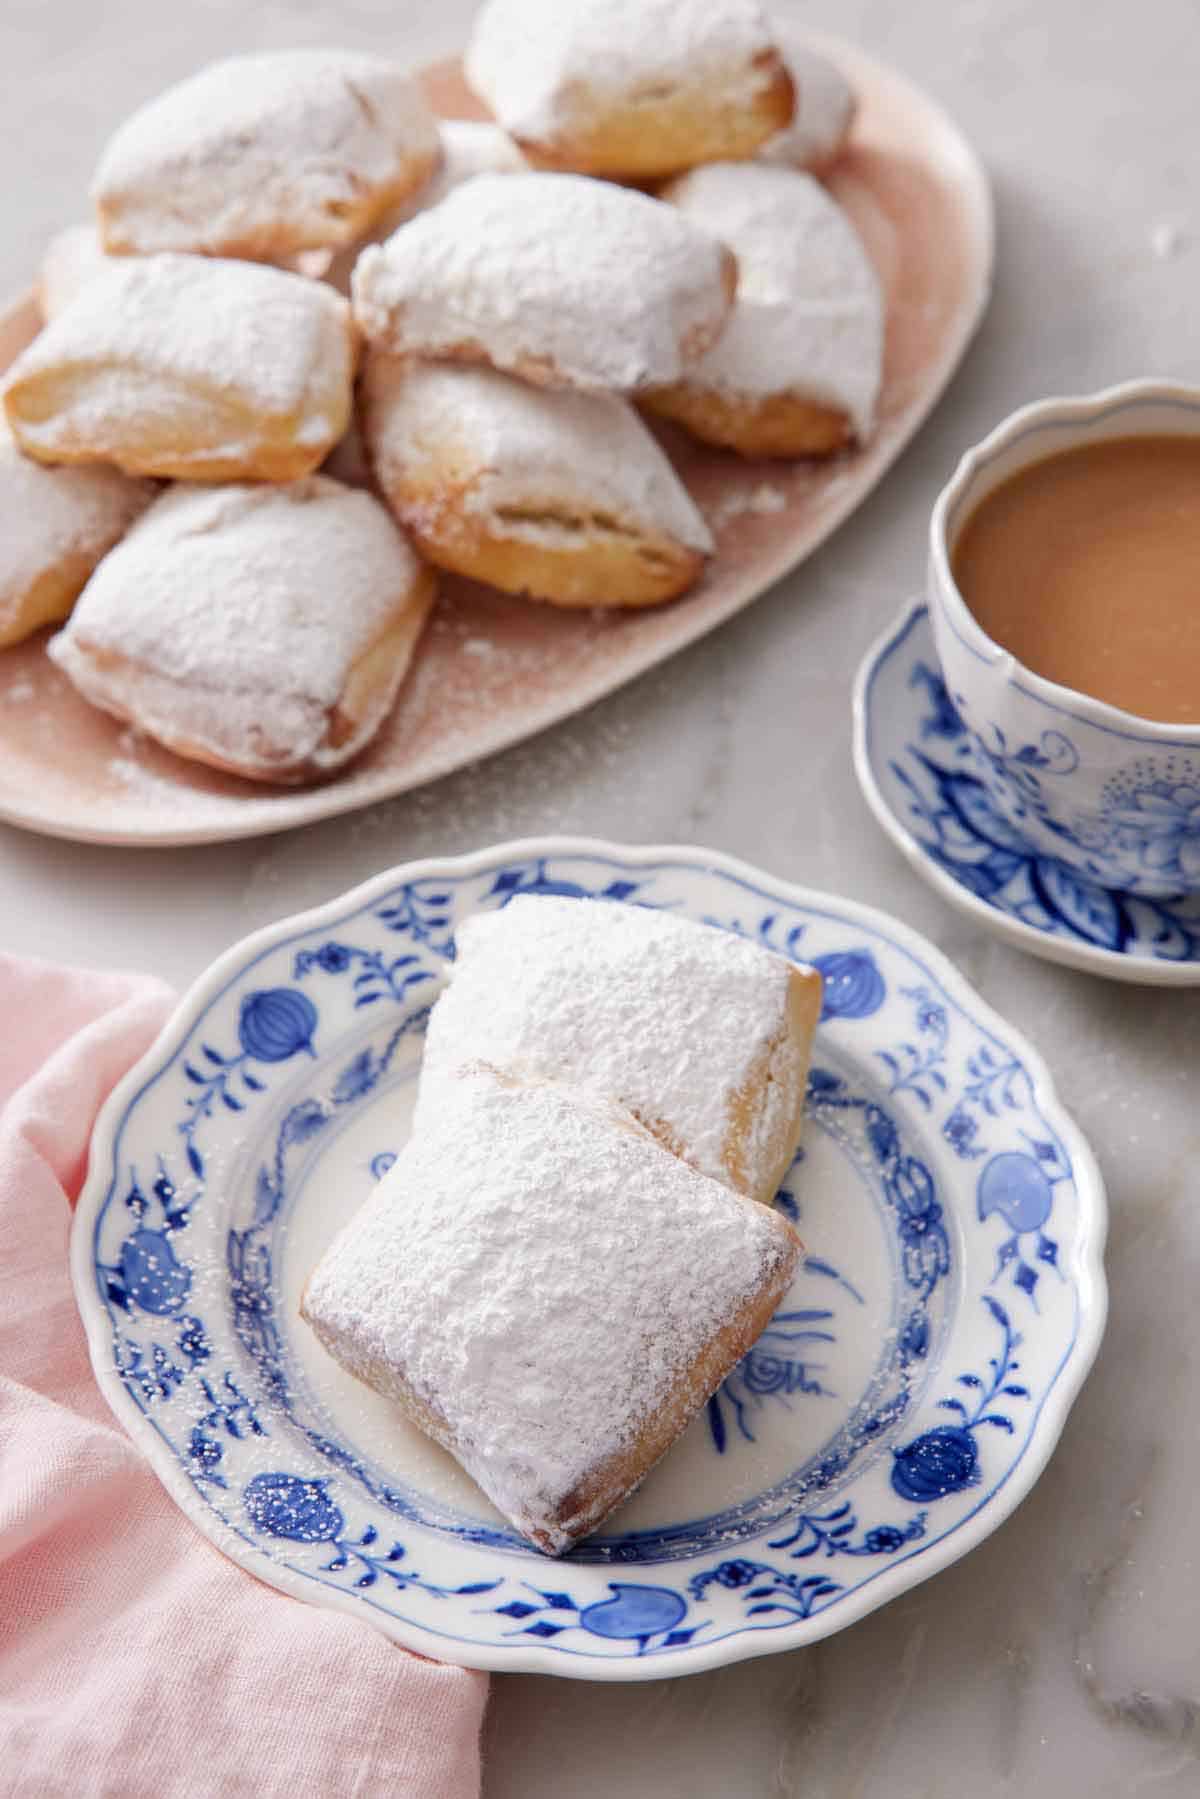 A plate with two air fryer beignets with a platter in the background along with a cup of coffee.